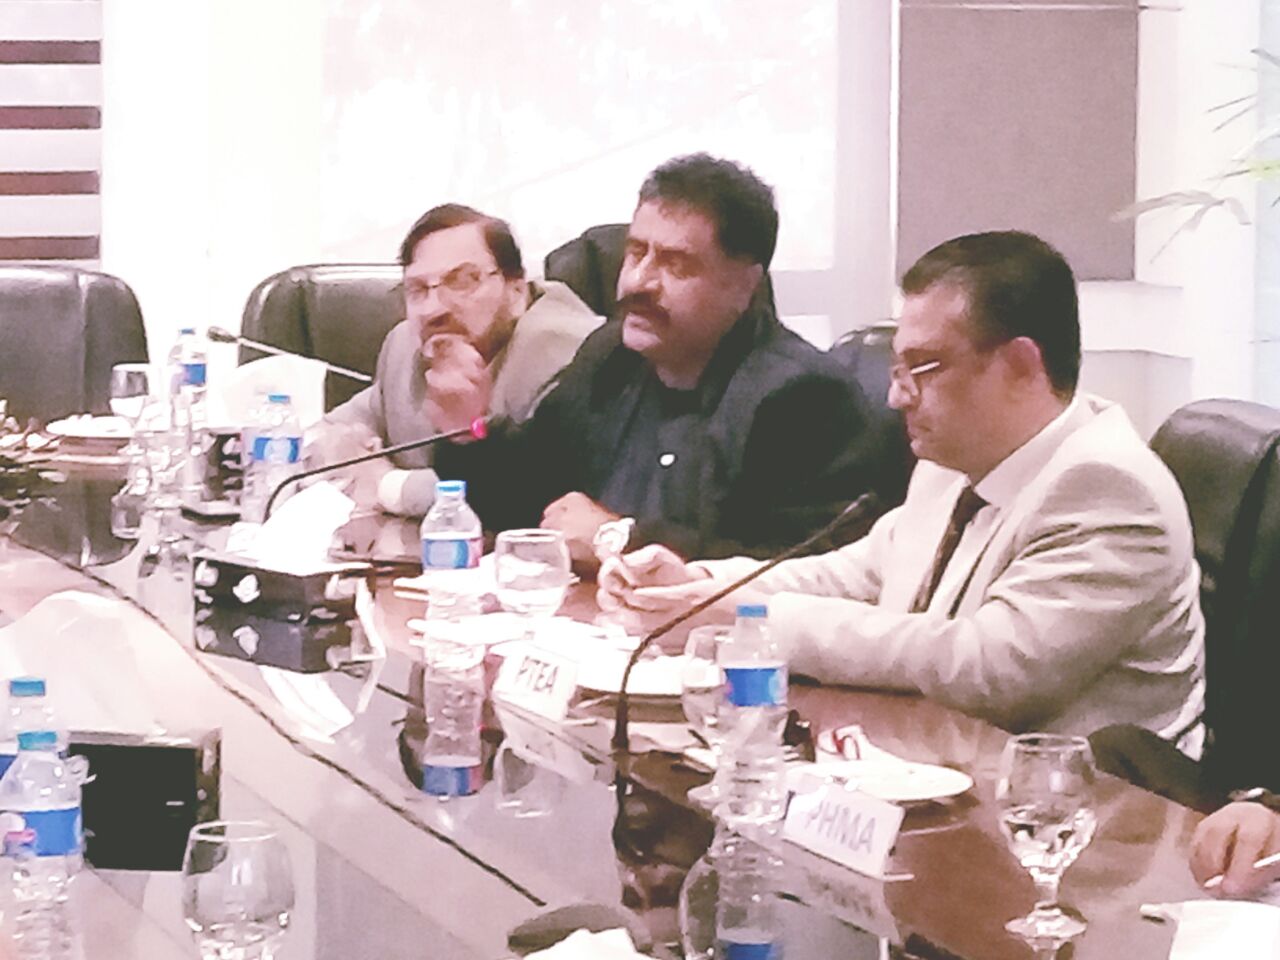 https://aptma.org.pk/wp-content/uploads/2021/10/Joint-Meeting-of-the-Textile-Industry-Associations-46.jpg